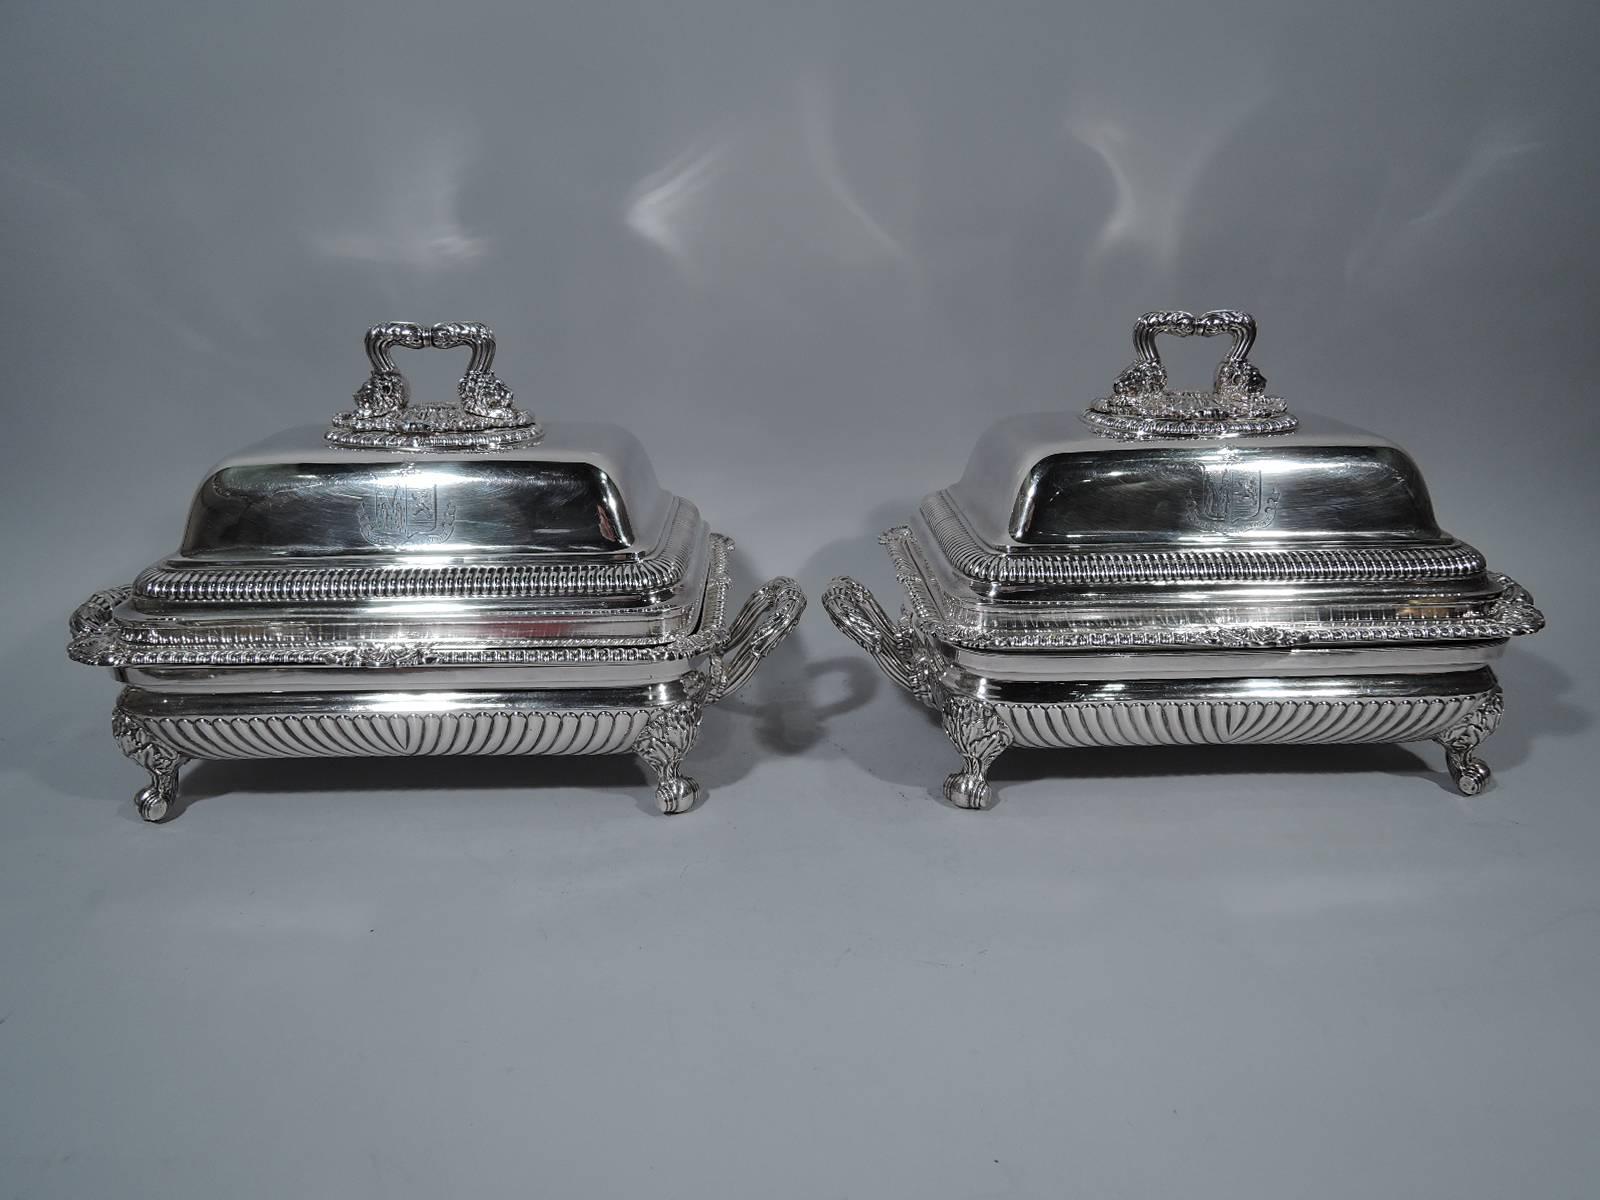 Pair of Regency sterling silver covered dishes. Made by Paul Storr in London in 1817. Each: Rectangular bowl has gadrooned rim with leaves and scallop shells. Double-domed cover has gadrooning and leaf bracket handle with lion’s heads mounted to